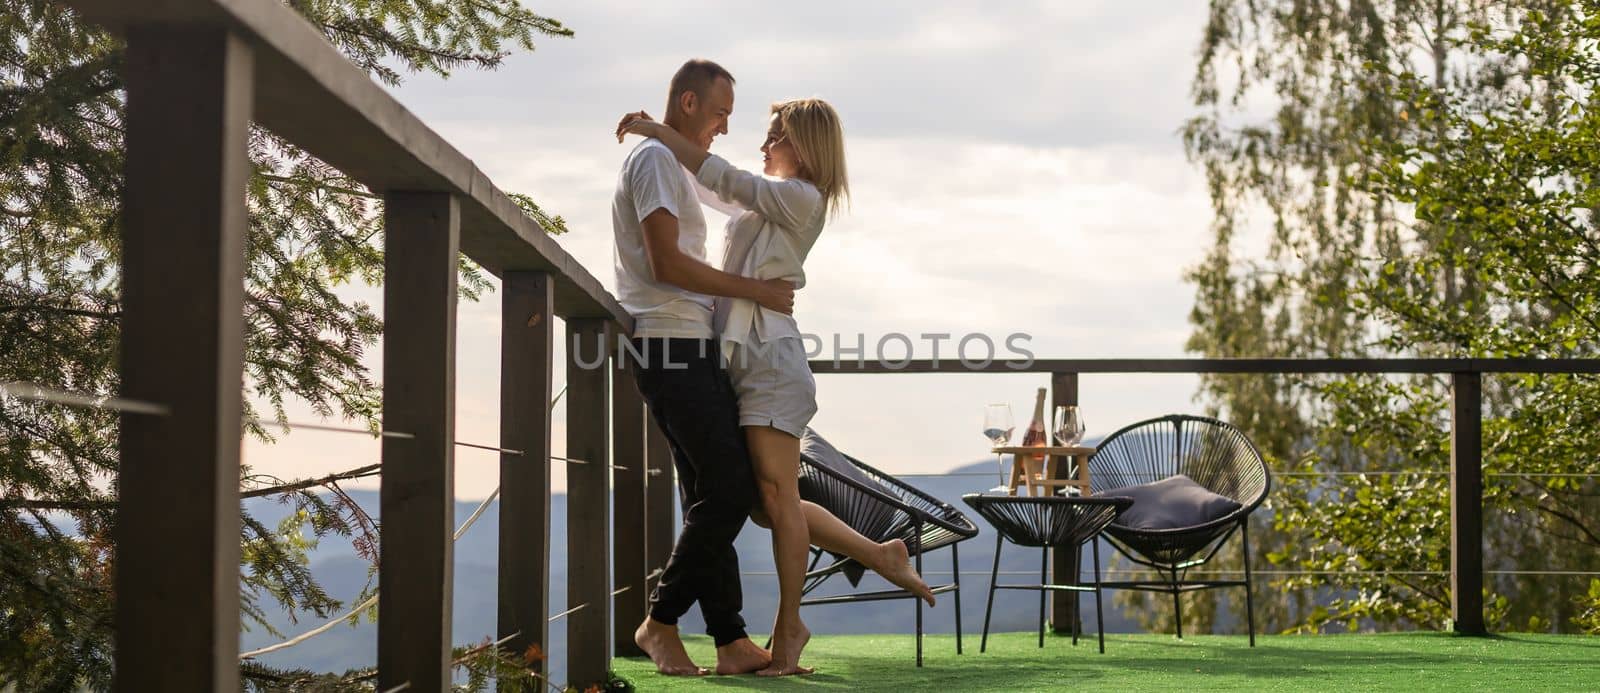 Horizontal sideview shot of a young couple in summer outfit enjoying the mountain view from terrace. Copy space